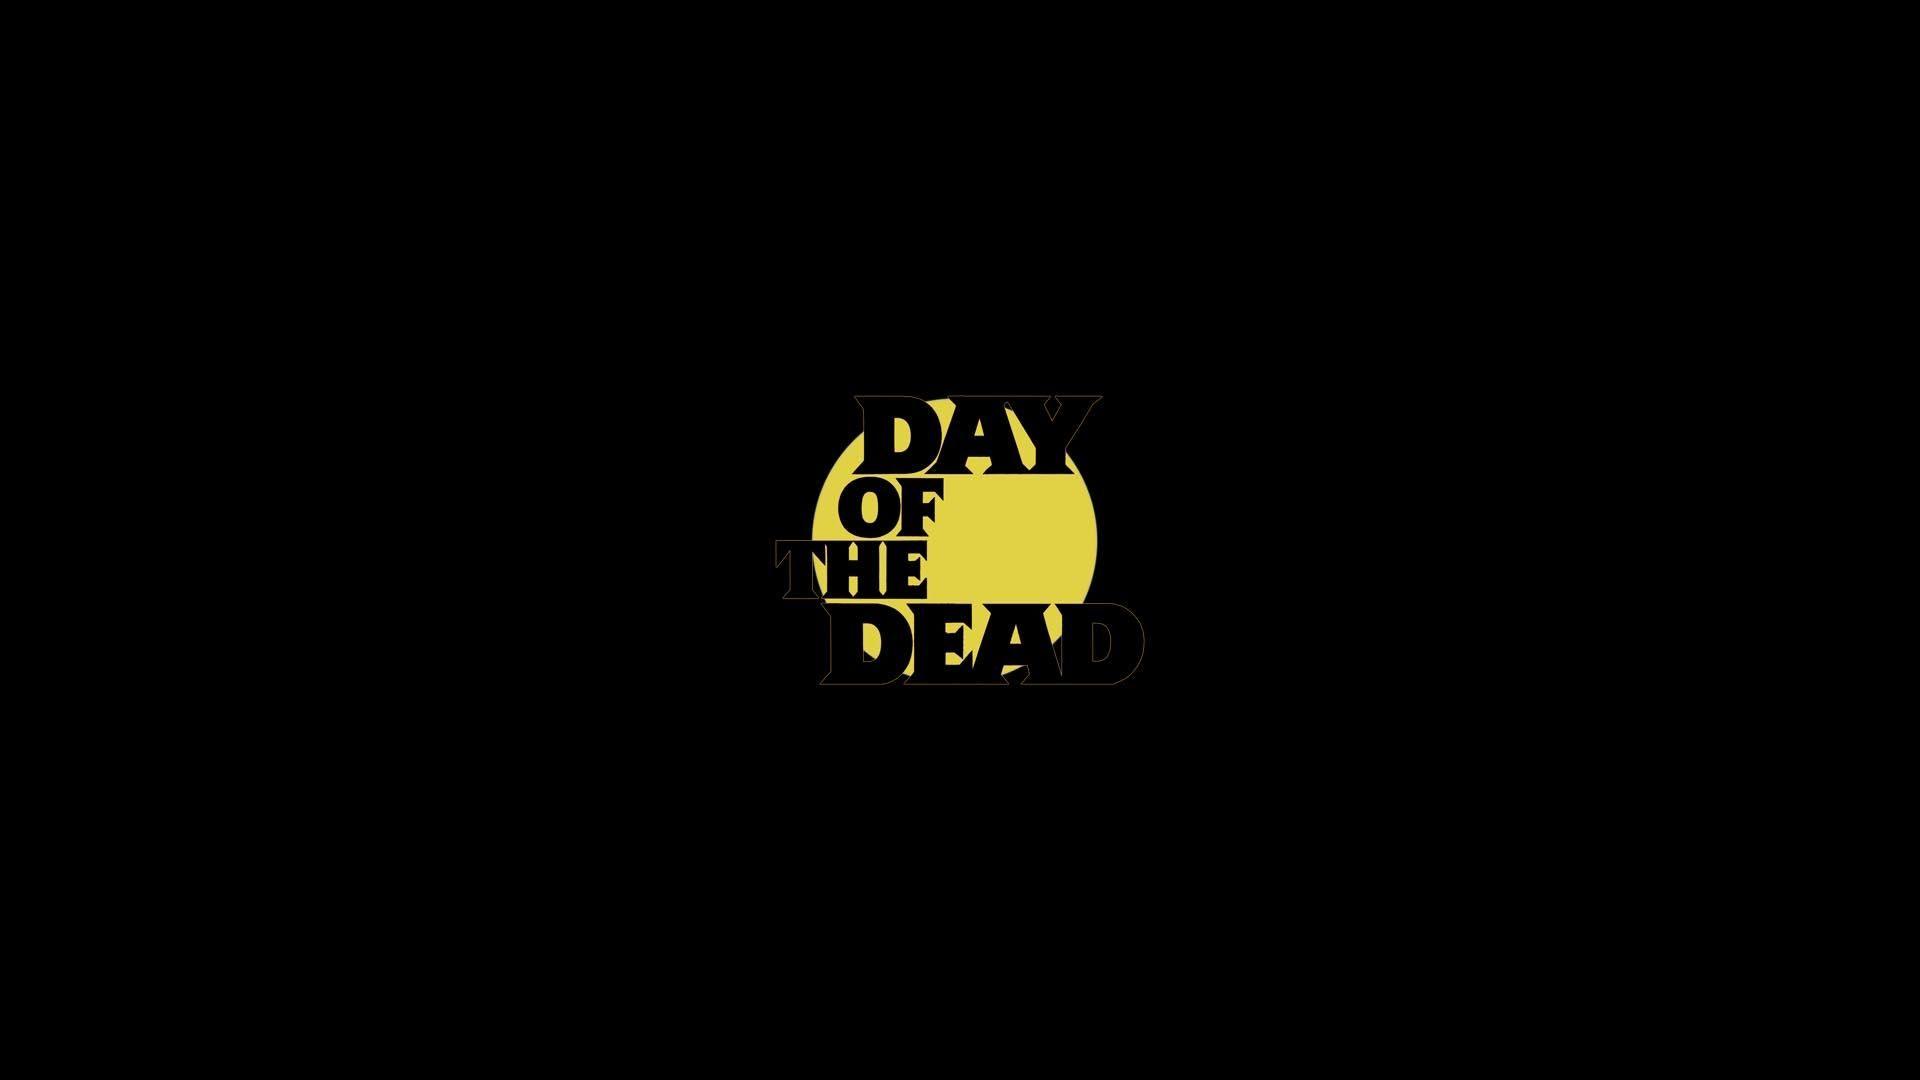 Day of the Dead 1985 Wallpaper